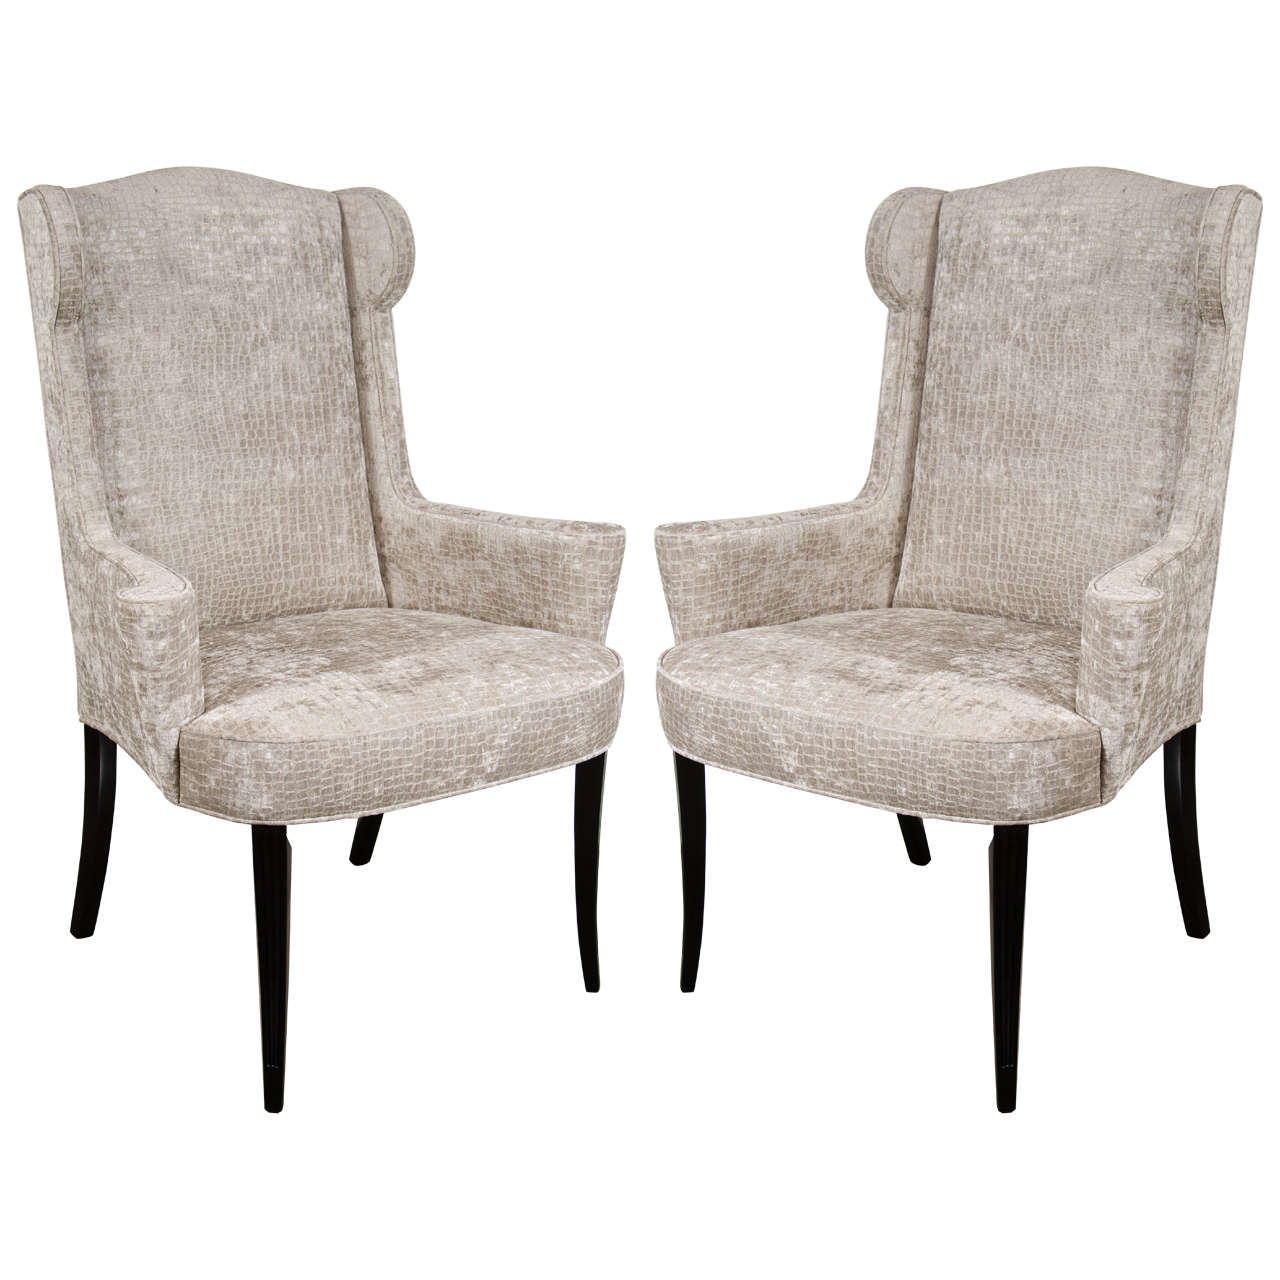 Pair of Mid-Century Modernist Scroll-Arm Wingback Chairs in Crocodile Velvet